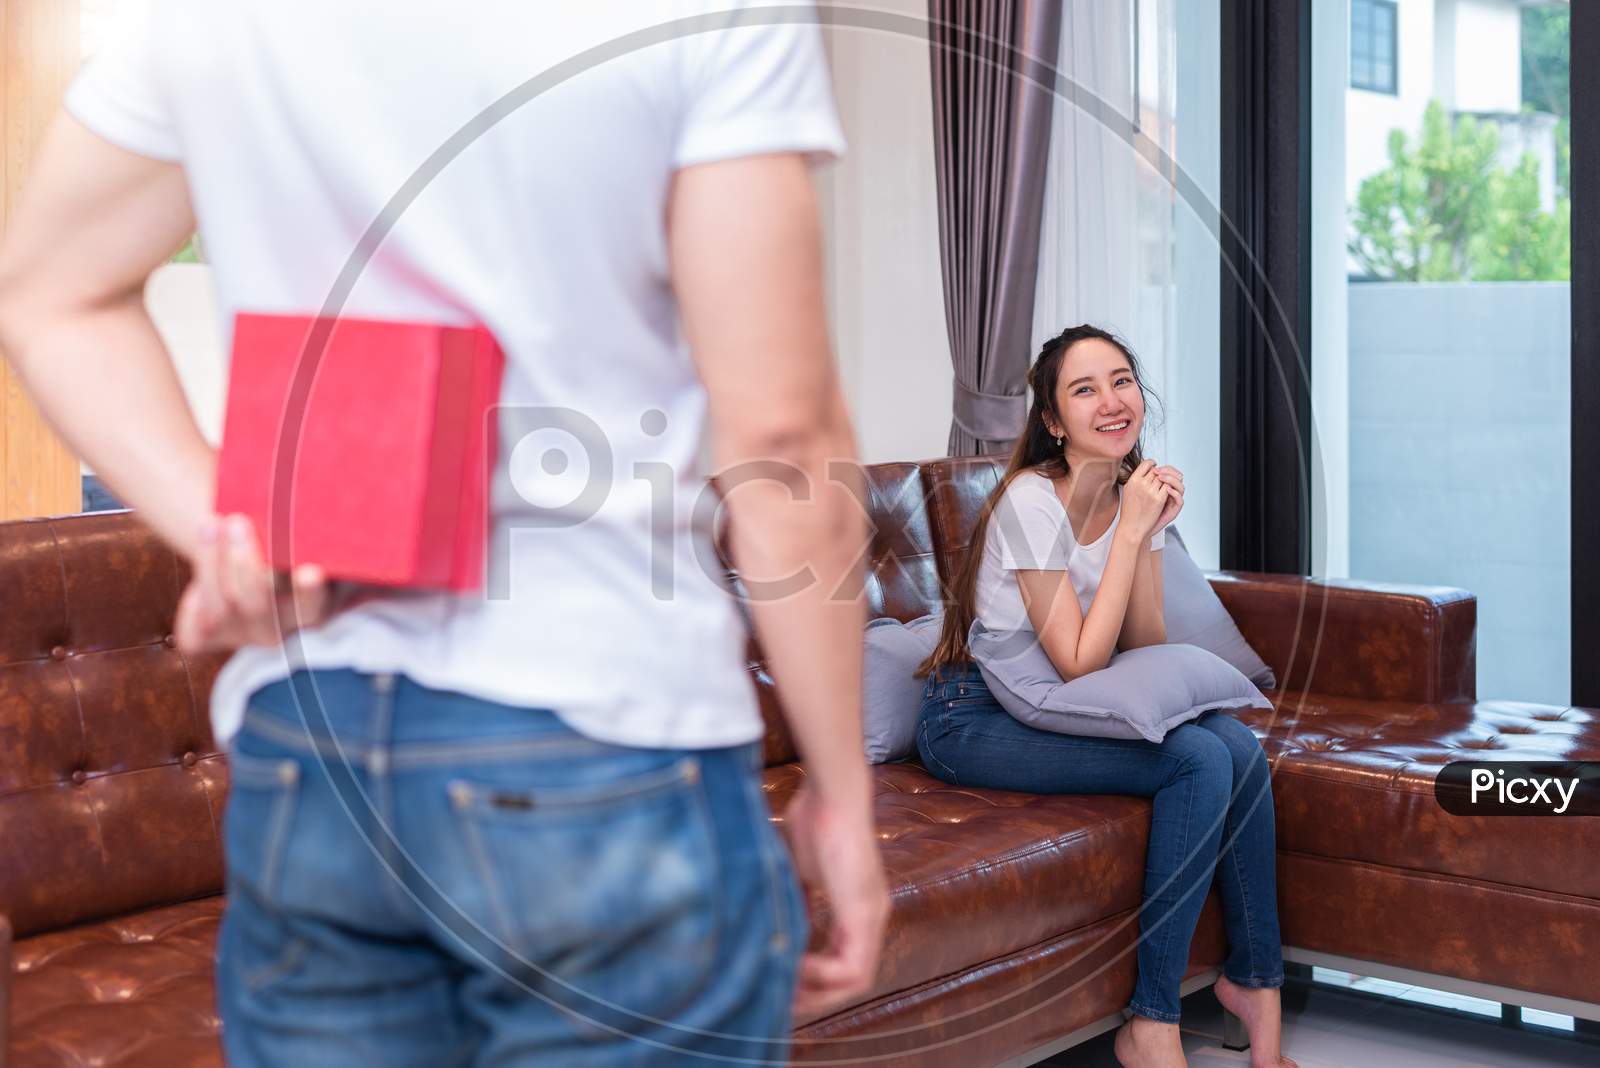 Boy Surprise His Asian Girlfriend By Holding Gift Box Behind Him At Their Home. Valentine'S Day And Pre Wedding Honeymoon Concept. People And Lifestyles Concept.